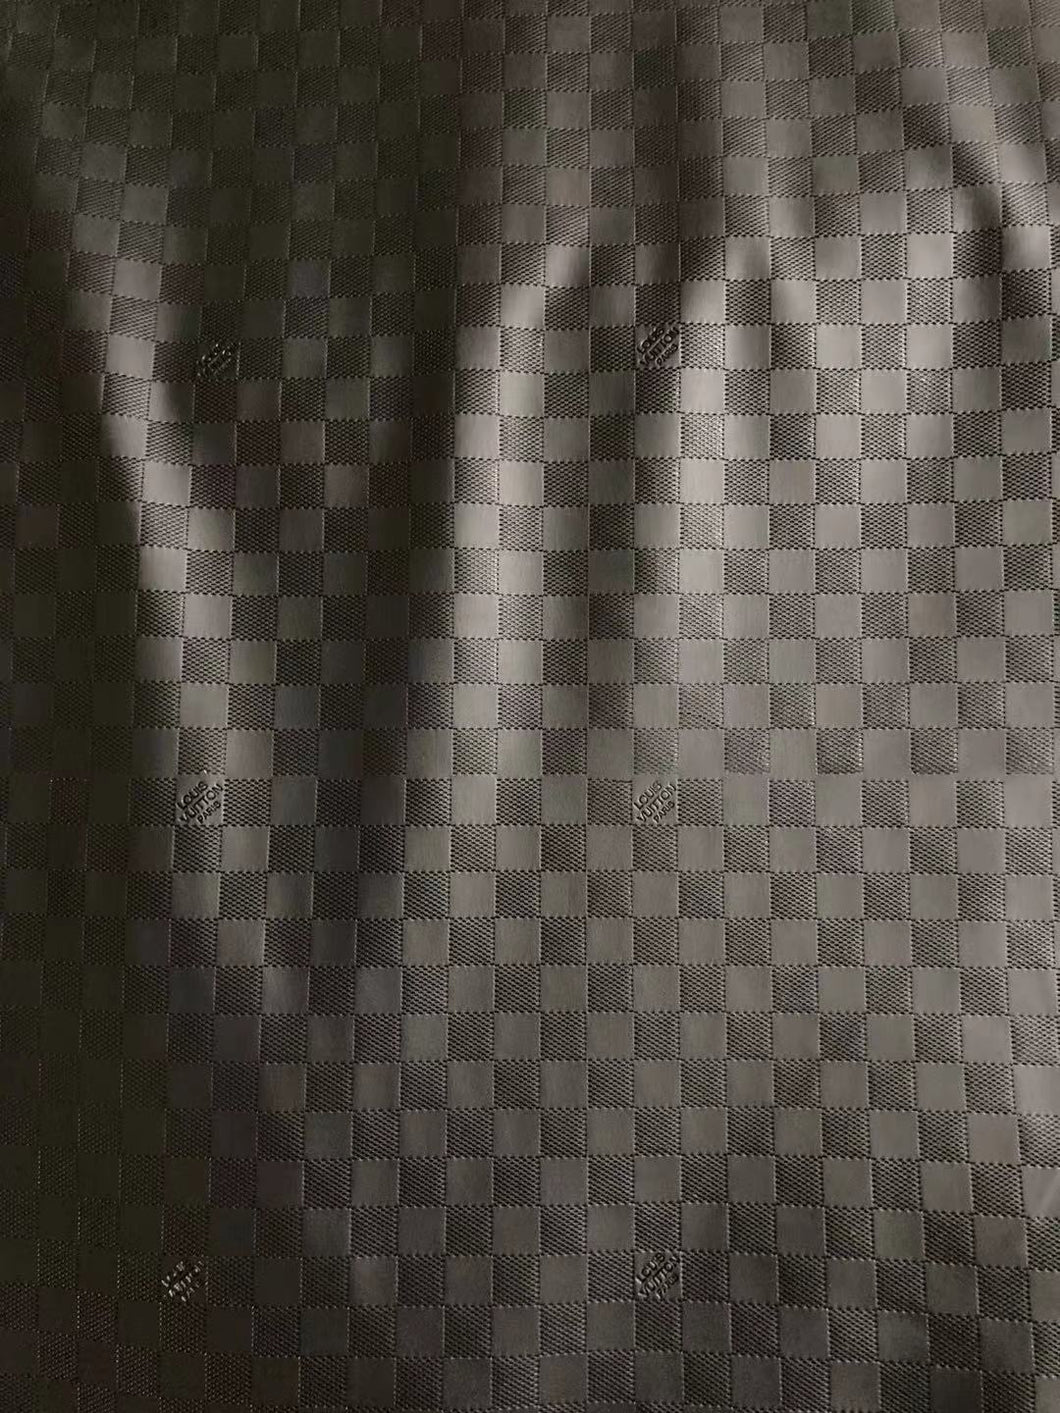 Textured Black Embossed LV Damier Check Soft Leather